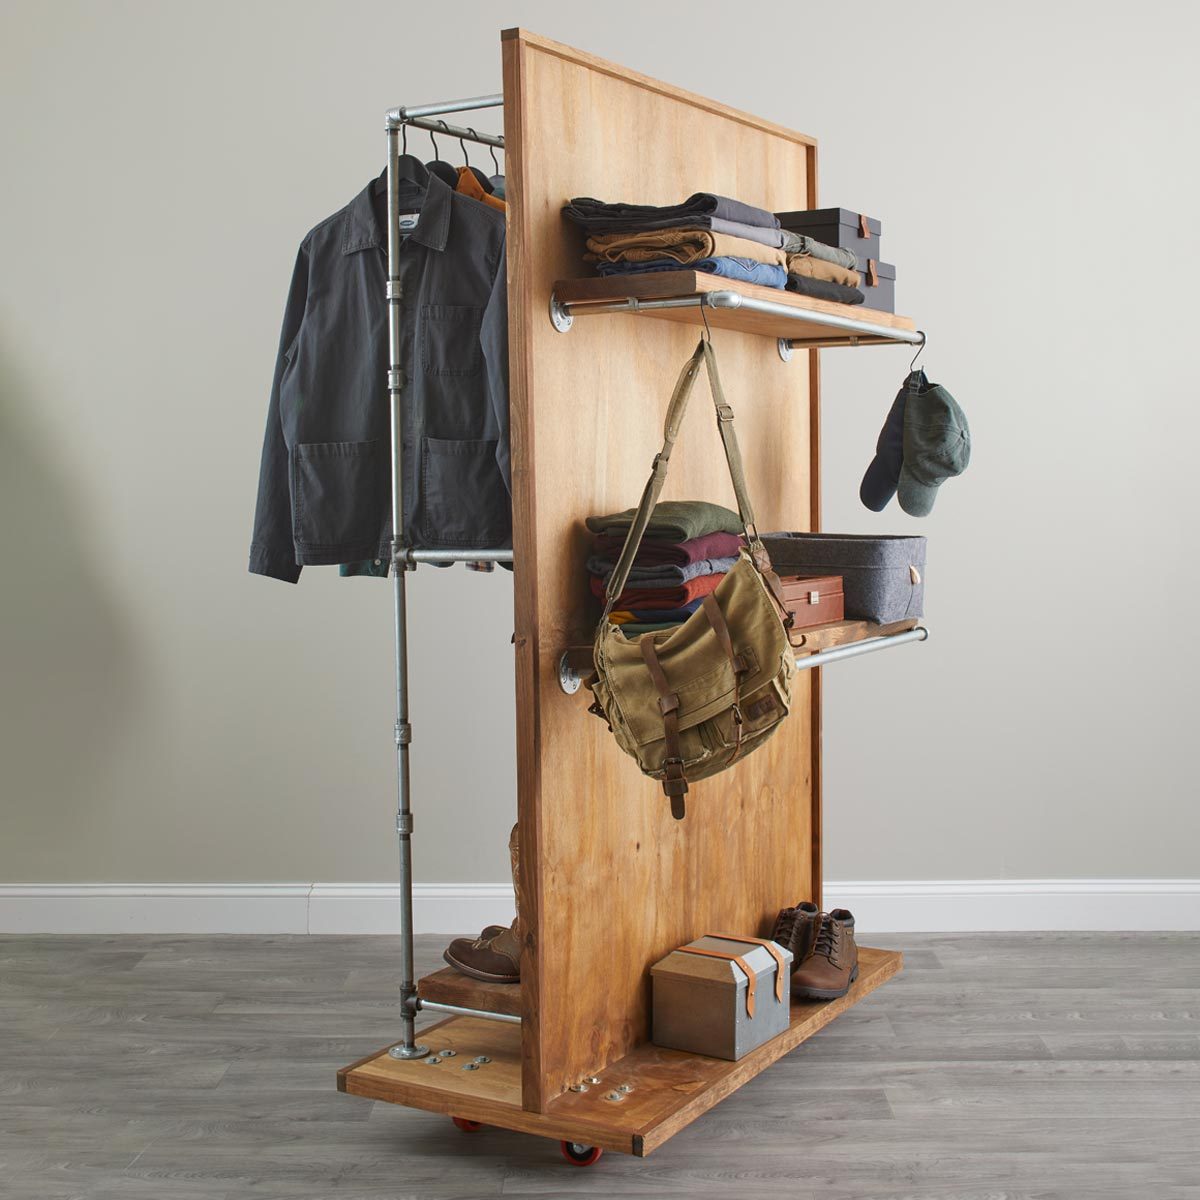 How To Make A Clothes Rack On Wheels